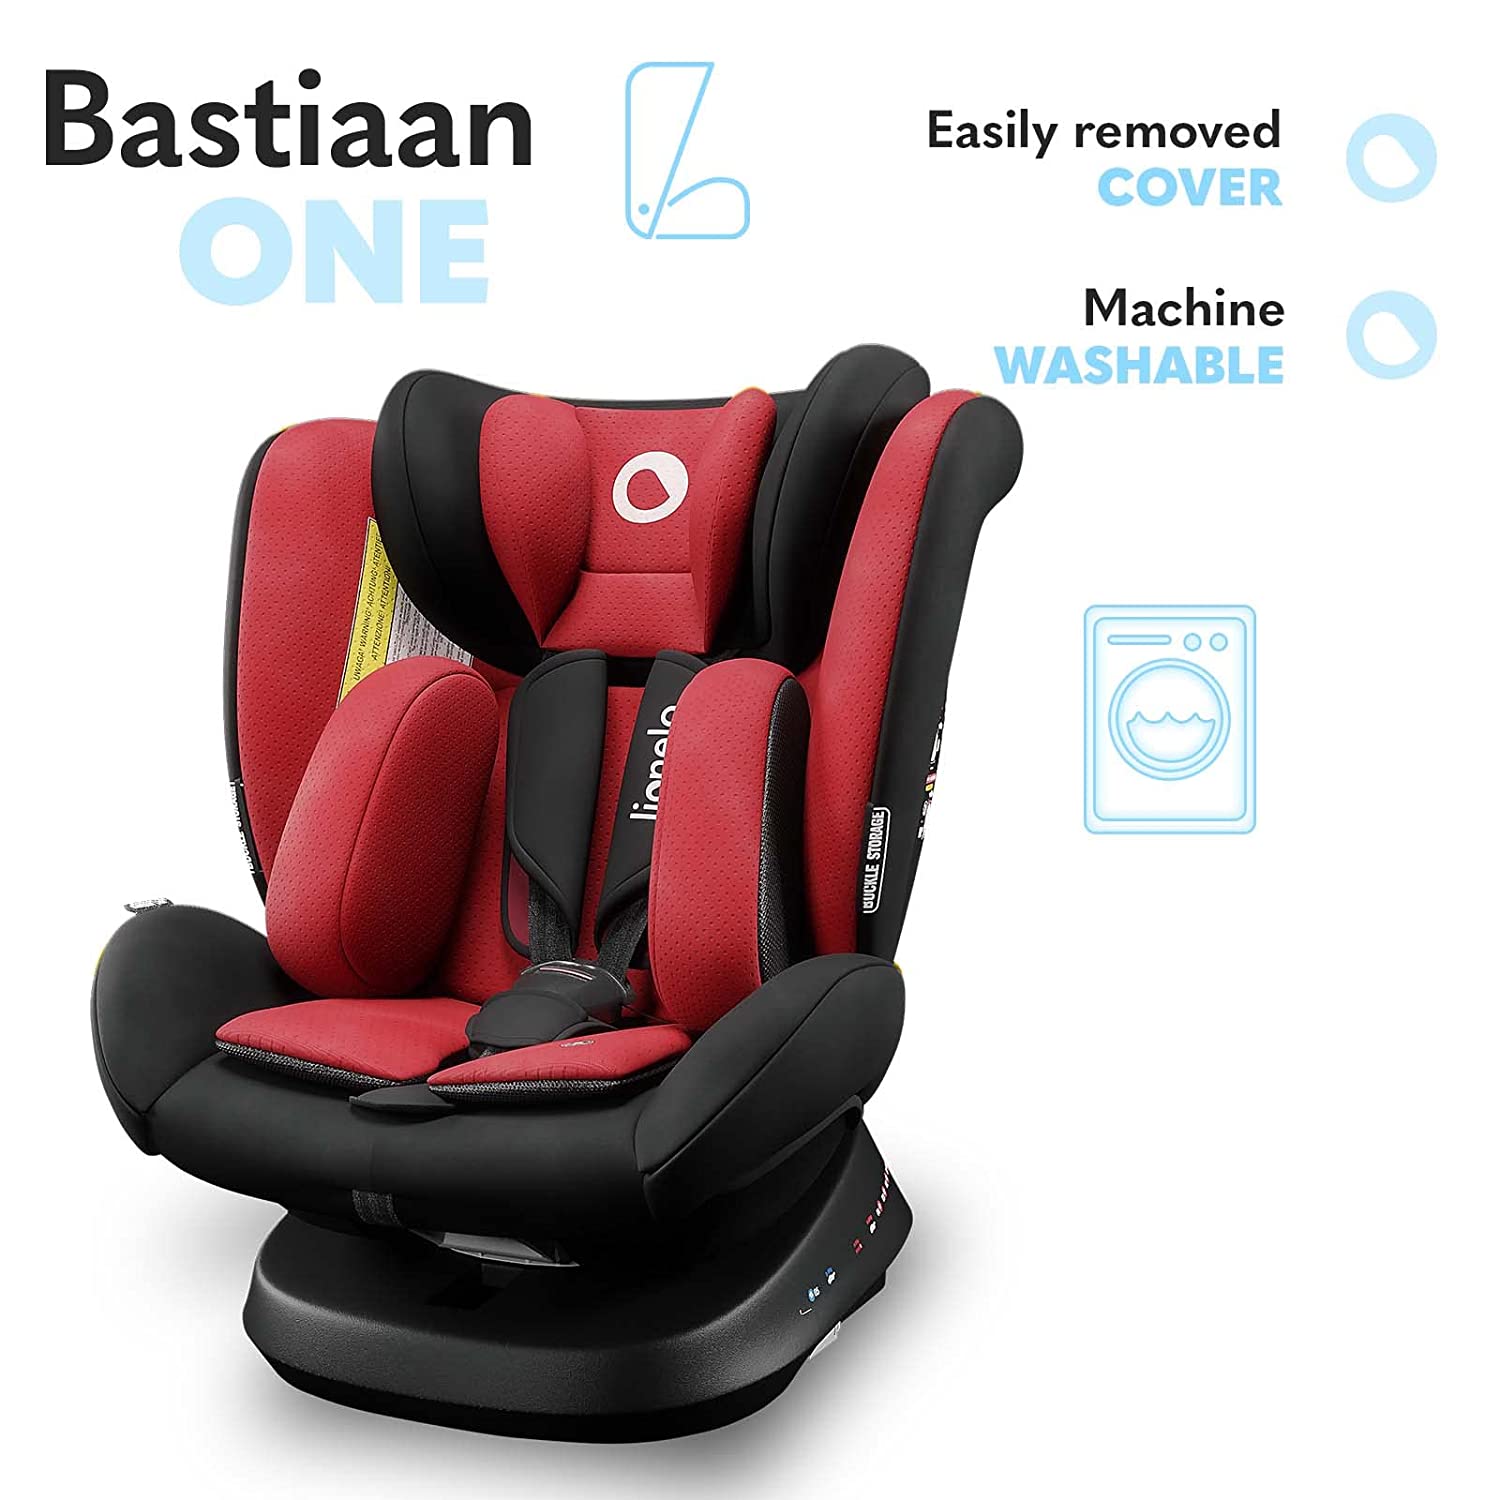 LIONELO Bastiaan One Child Seat from Birth 0-36 kg Isofix Top Tether 360 Degree Rotating Reverse Forward Side Protection 5-Point Seat Belts Dri-Seat (Red)